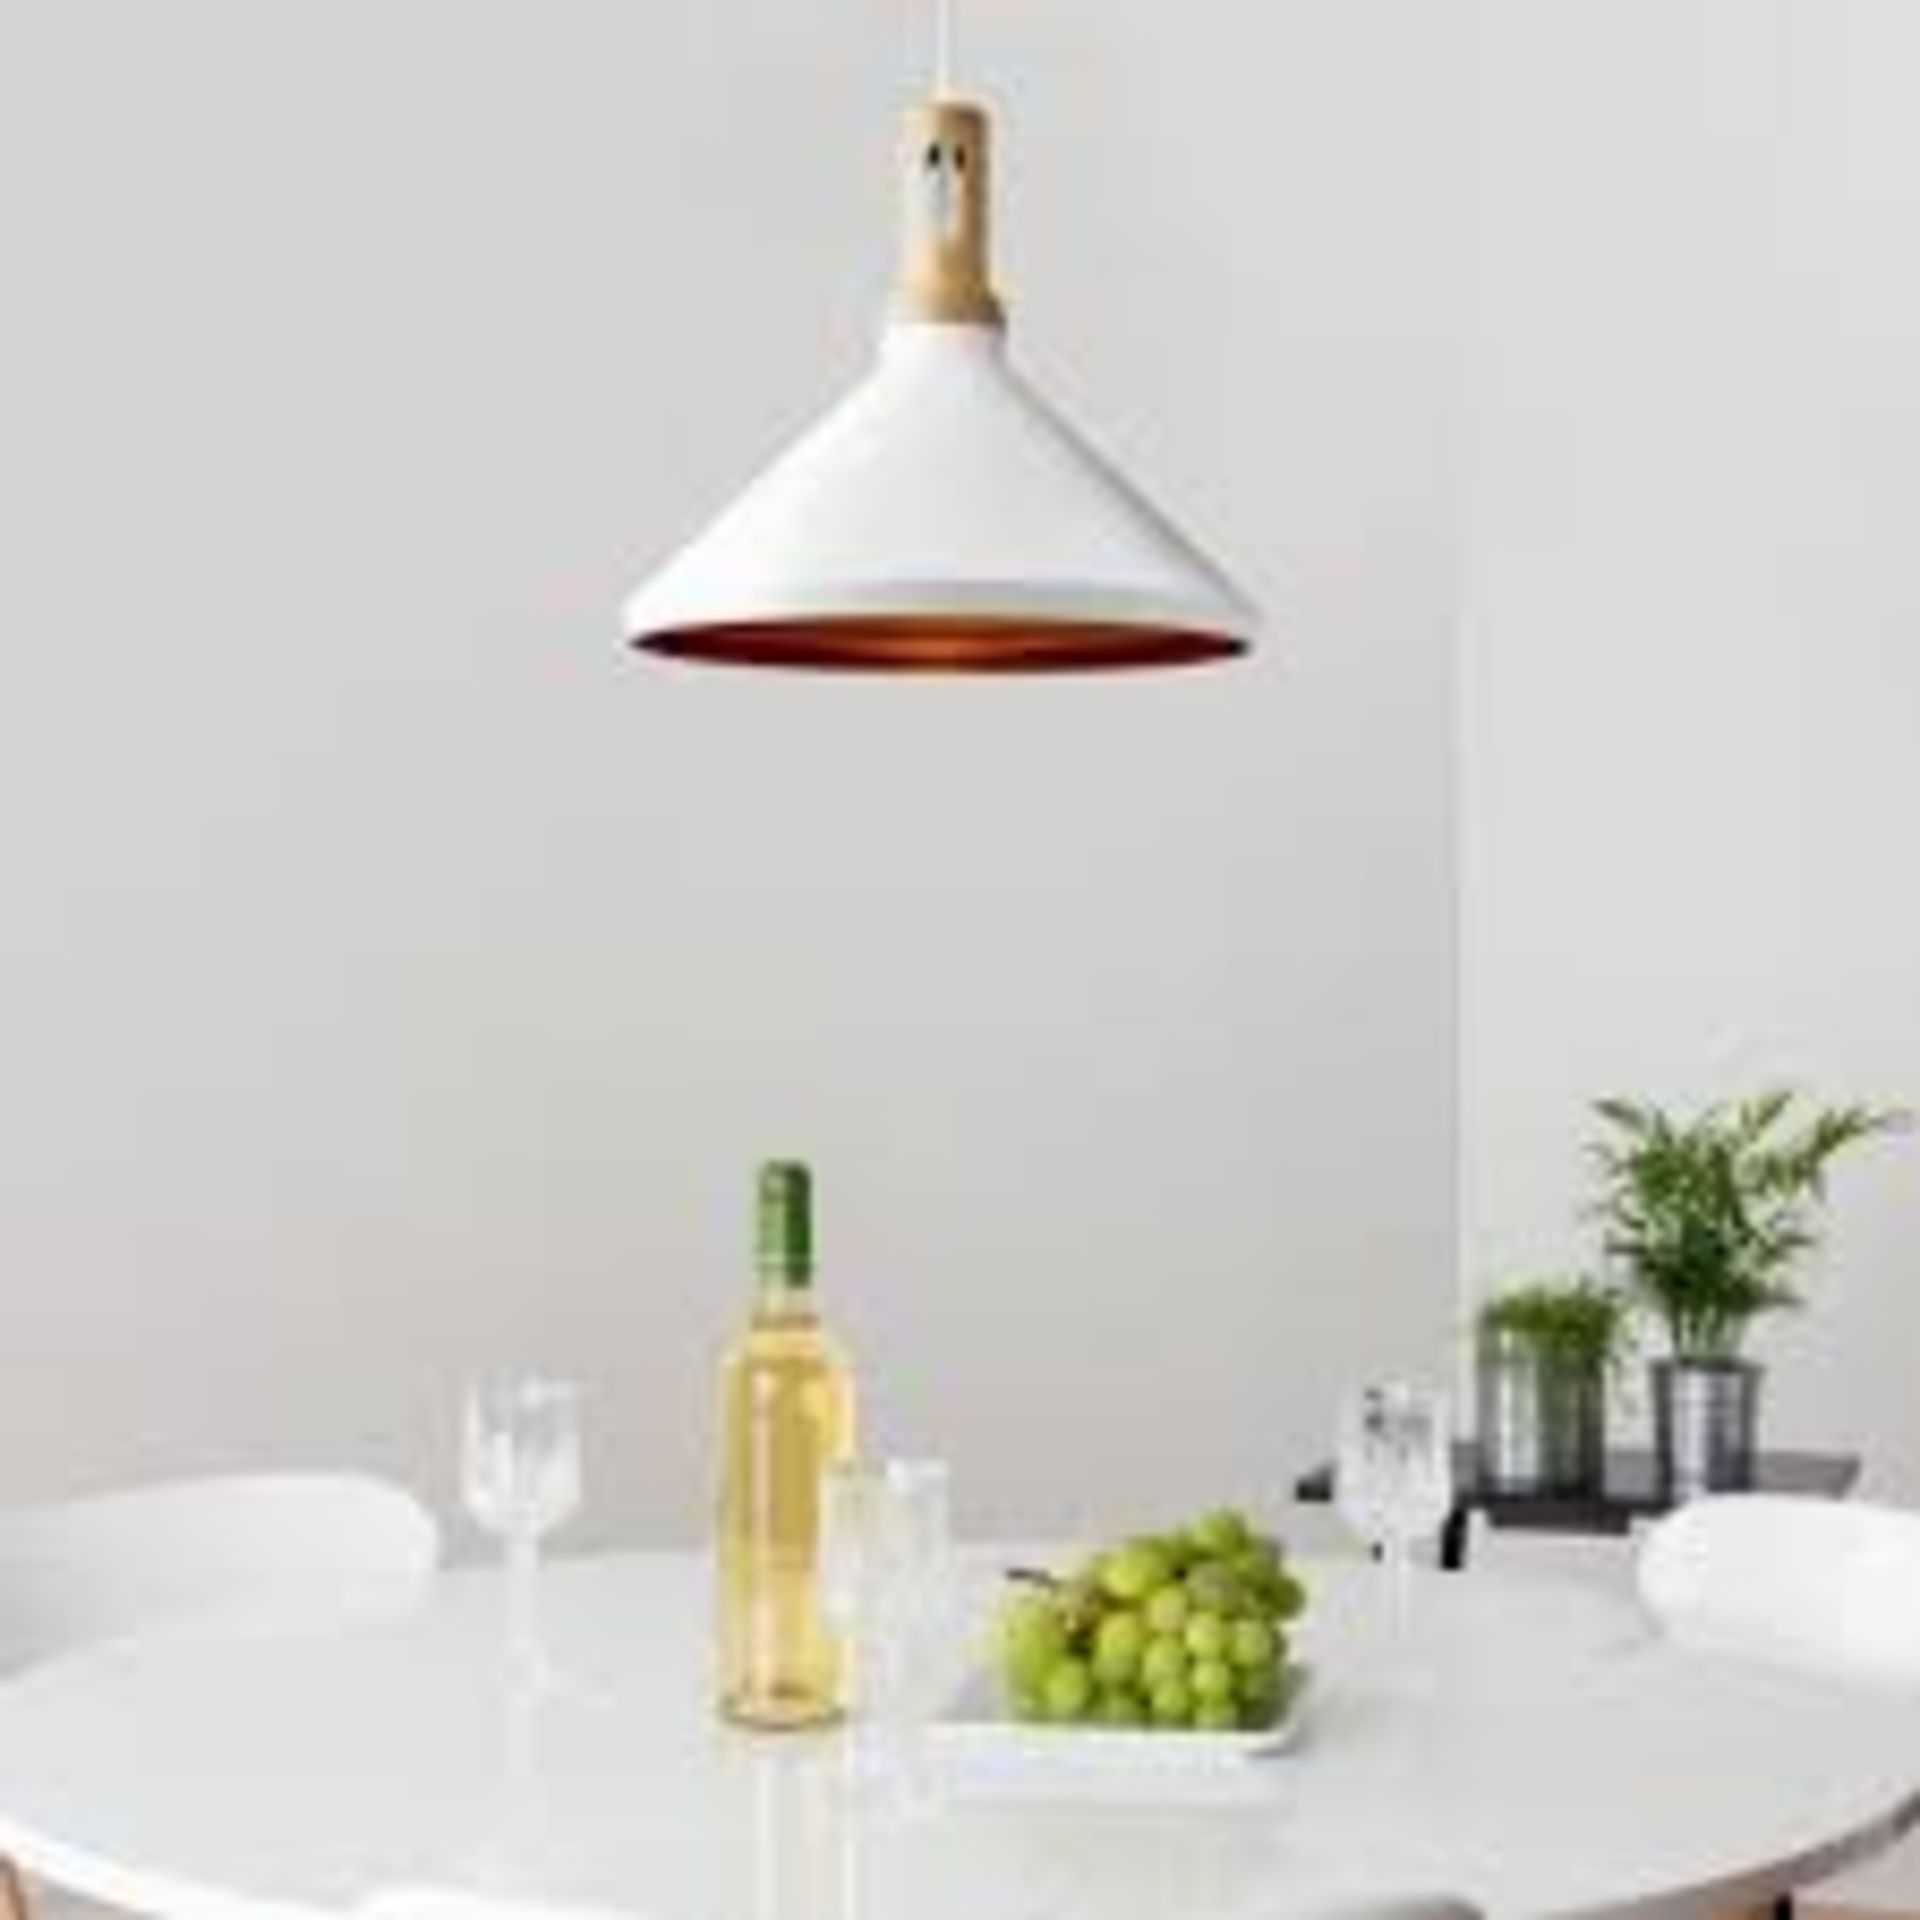 2 x Searchlight 1 Light Cone Pendant in white - Ref: 7051WH - New and Boxed - RRP: £85(each) - Image 4 of 4